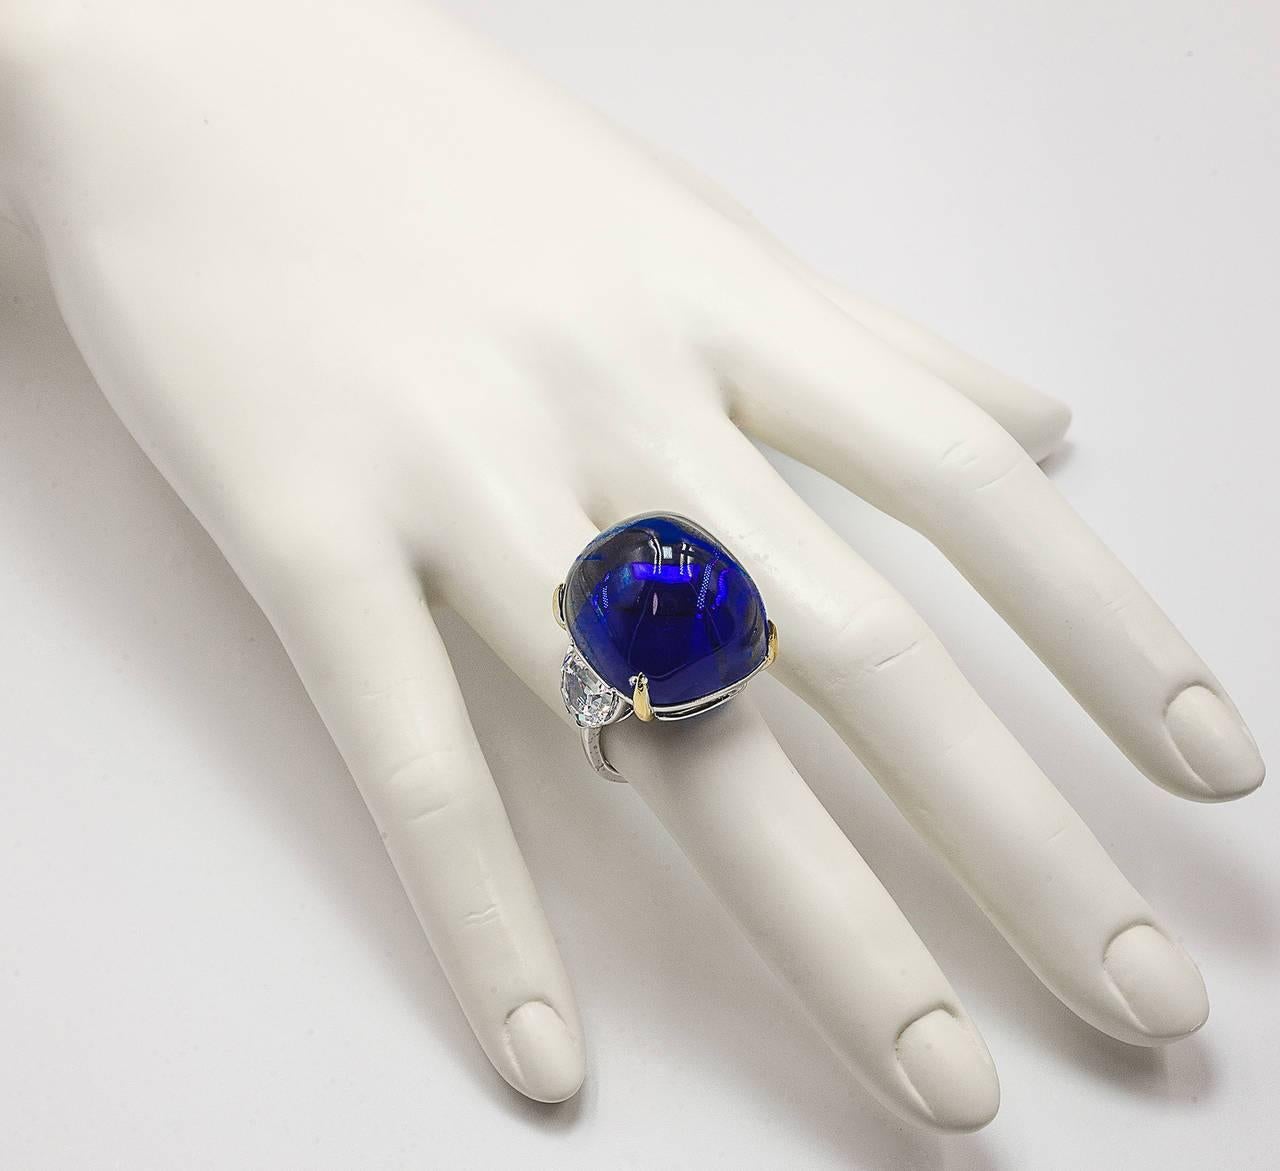 Superb faux French pyramid-cut cabochon Royal Kashmir Blue sapphire half-moon cubic zircon set white gold ring. The faux  man made sapphire has the look of about 40 carats and the side stones about two carat diamond weight each. Faux sapphire 